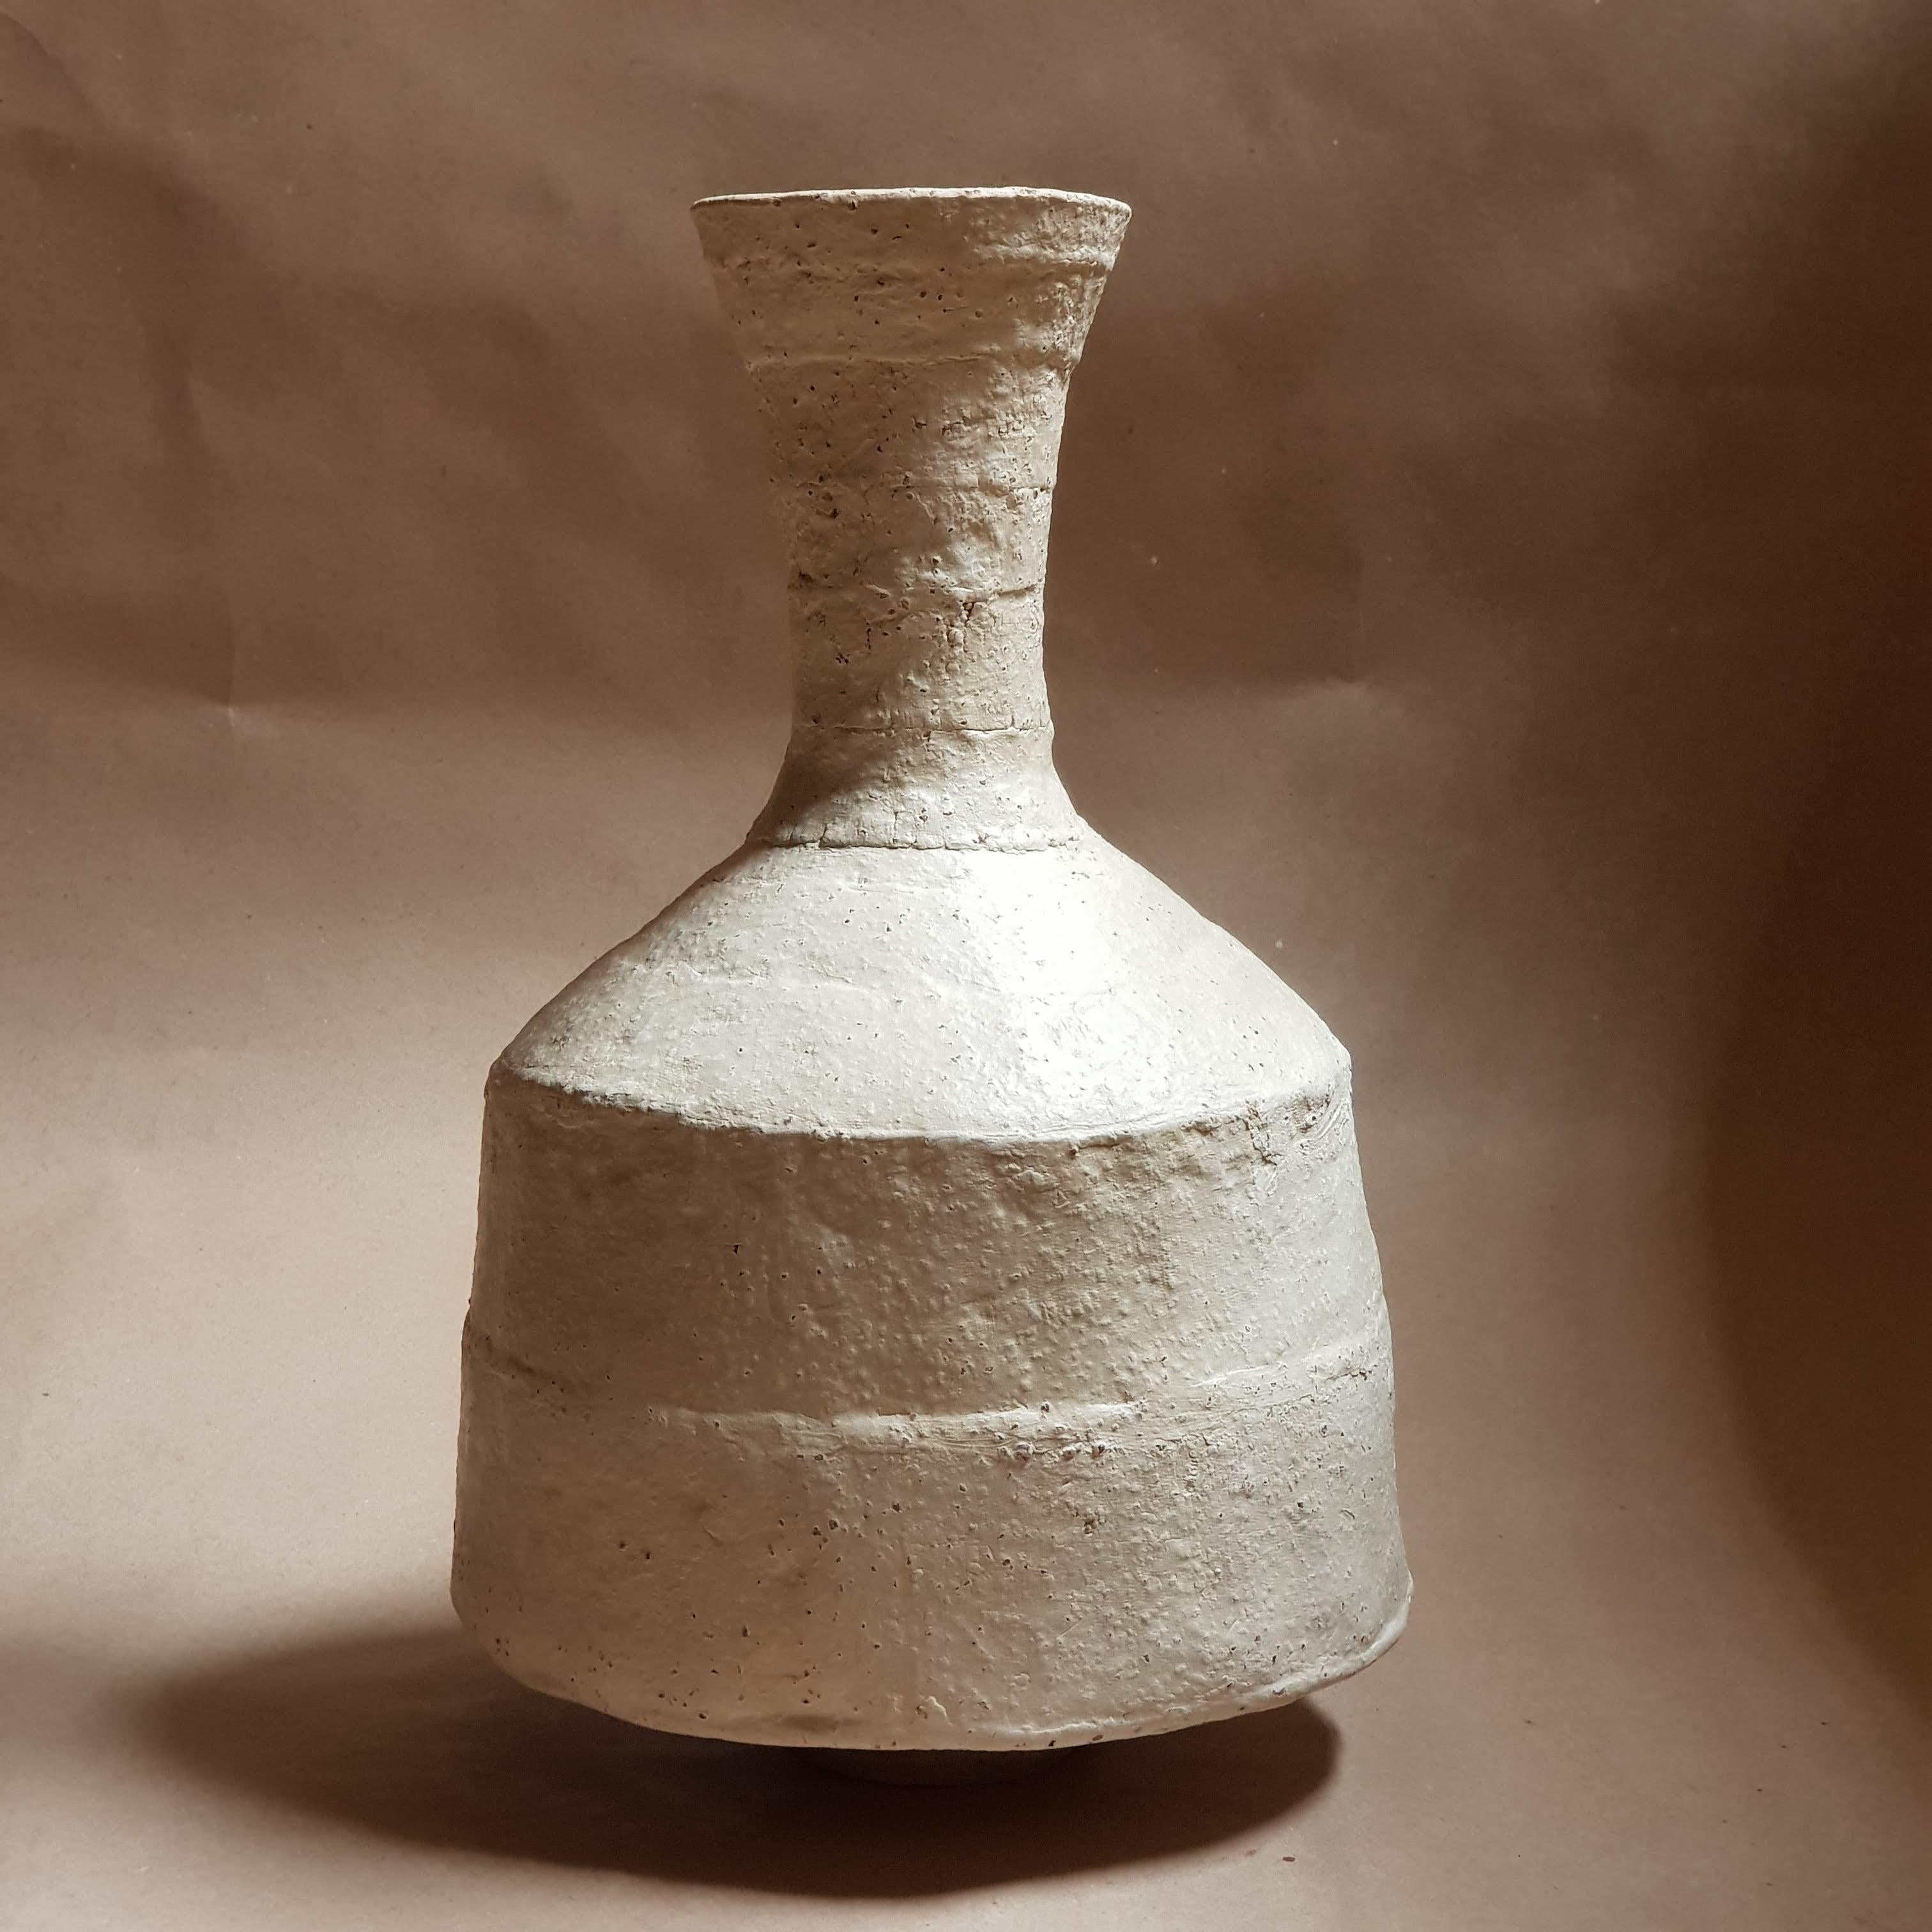 Beige Stoneware Lekythos Vase by Elena Vasilantonaki
Unique
Dimensions: ⌀ 17 x H 26 cm (Dimensions may vary)
Materials: Stoneware
Available finishes: Black, Beige , Brown, Red, Terracotta, White Patina

Growing up in Greece I was surrounded by